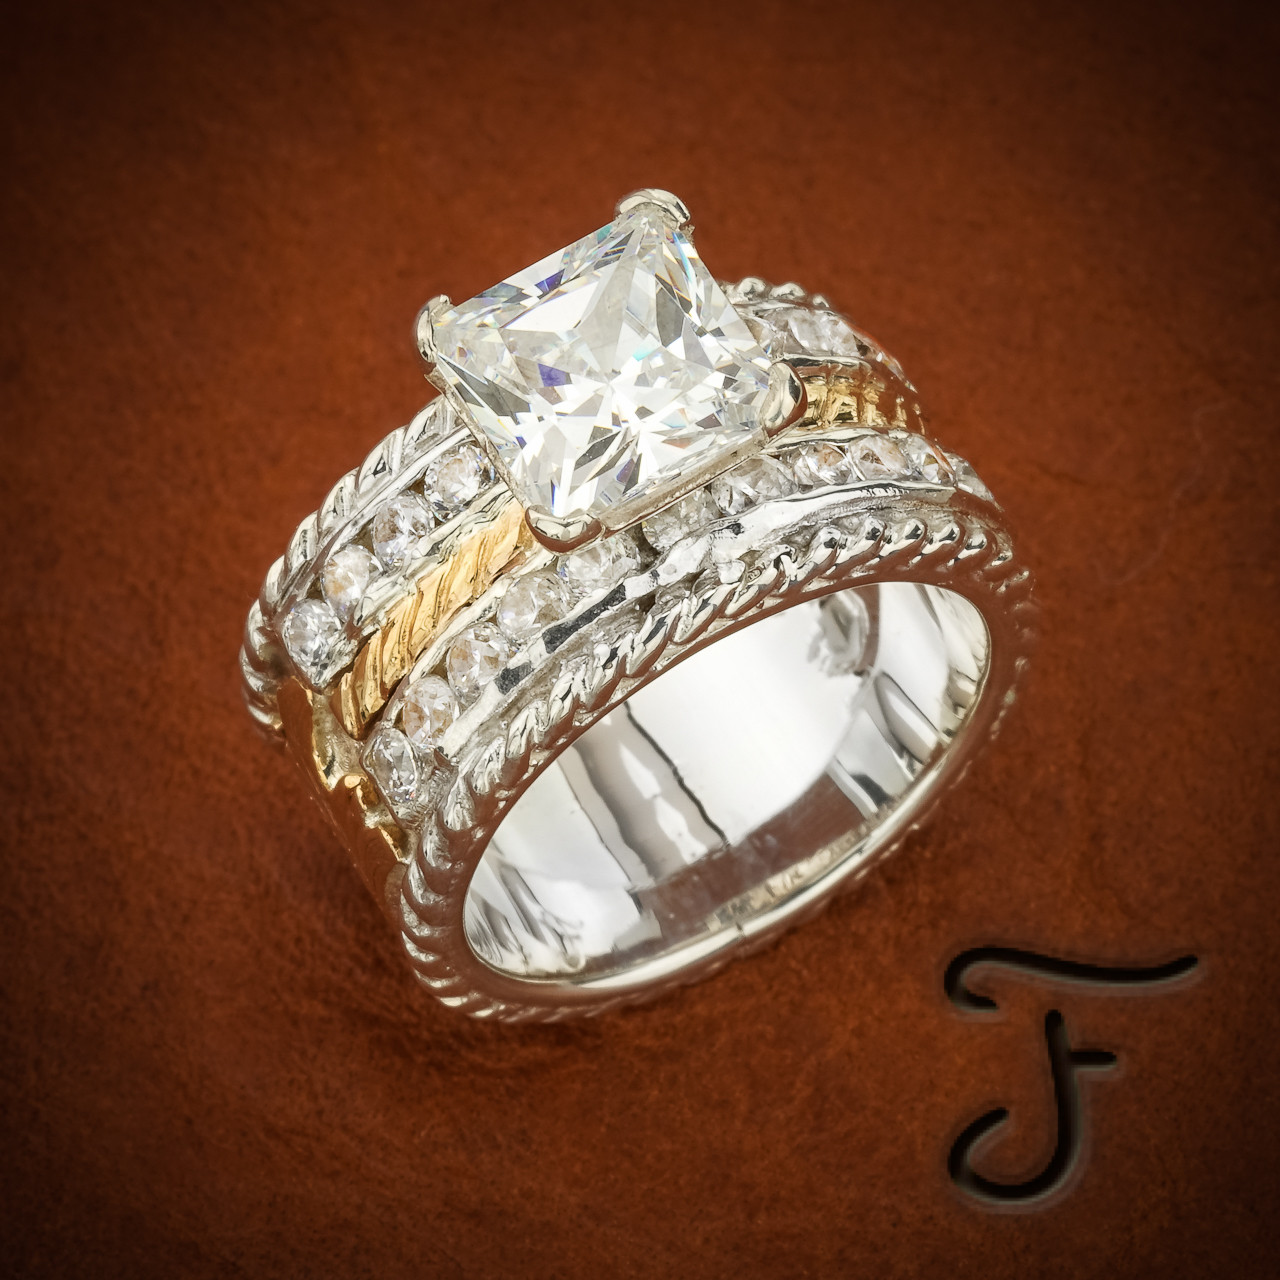 Cowboy Style Wedding Rings
 A Beautiful Western Wedding Ring Is Just the Ticket